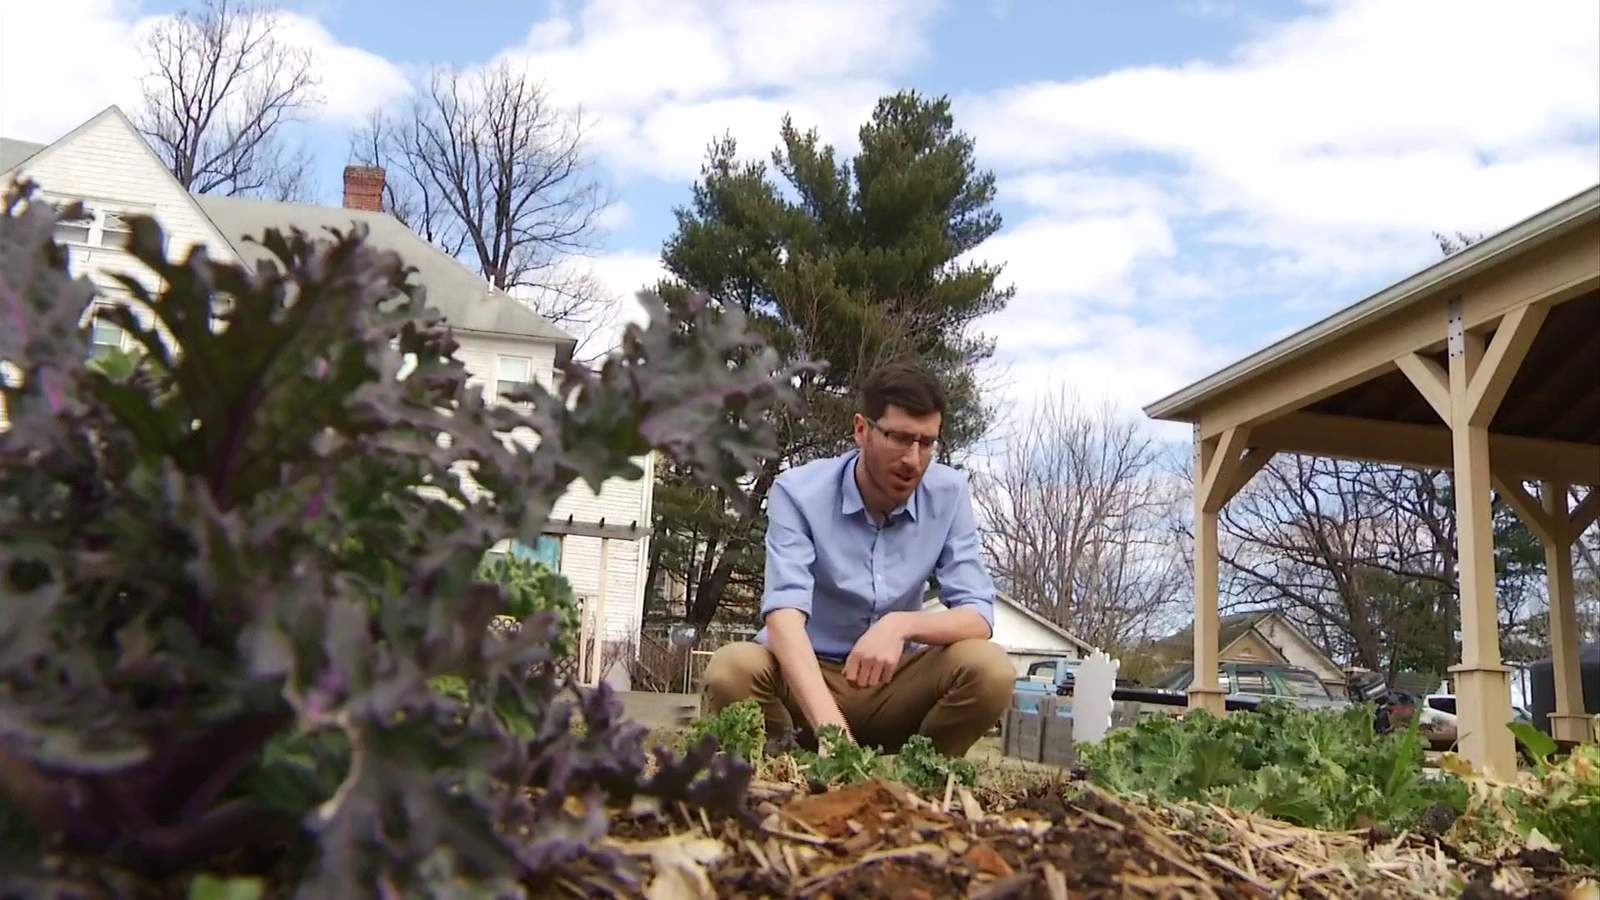 LEAPing into action: How you can help save Roanoke’s community gardens